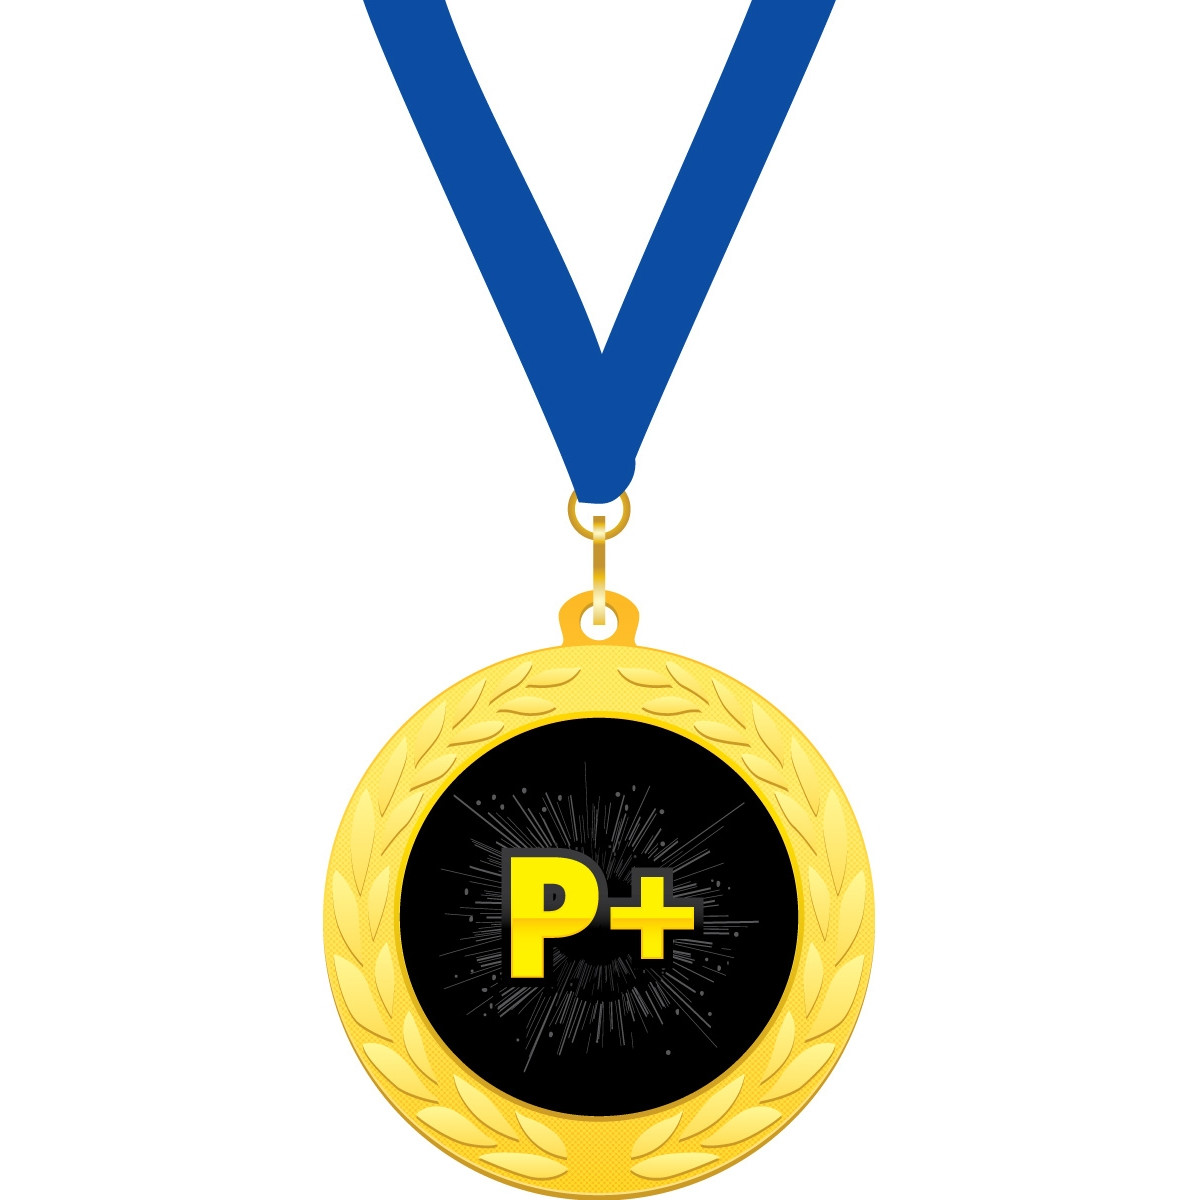 Custom 2 in. Gold Medallion with Blue Neck Ribbon (P Plus)